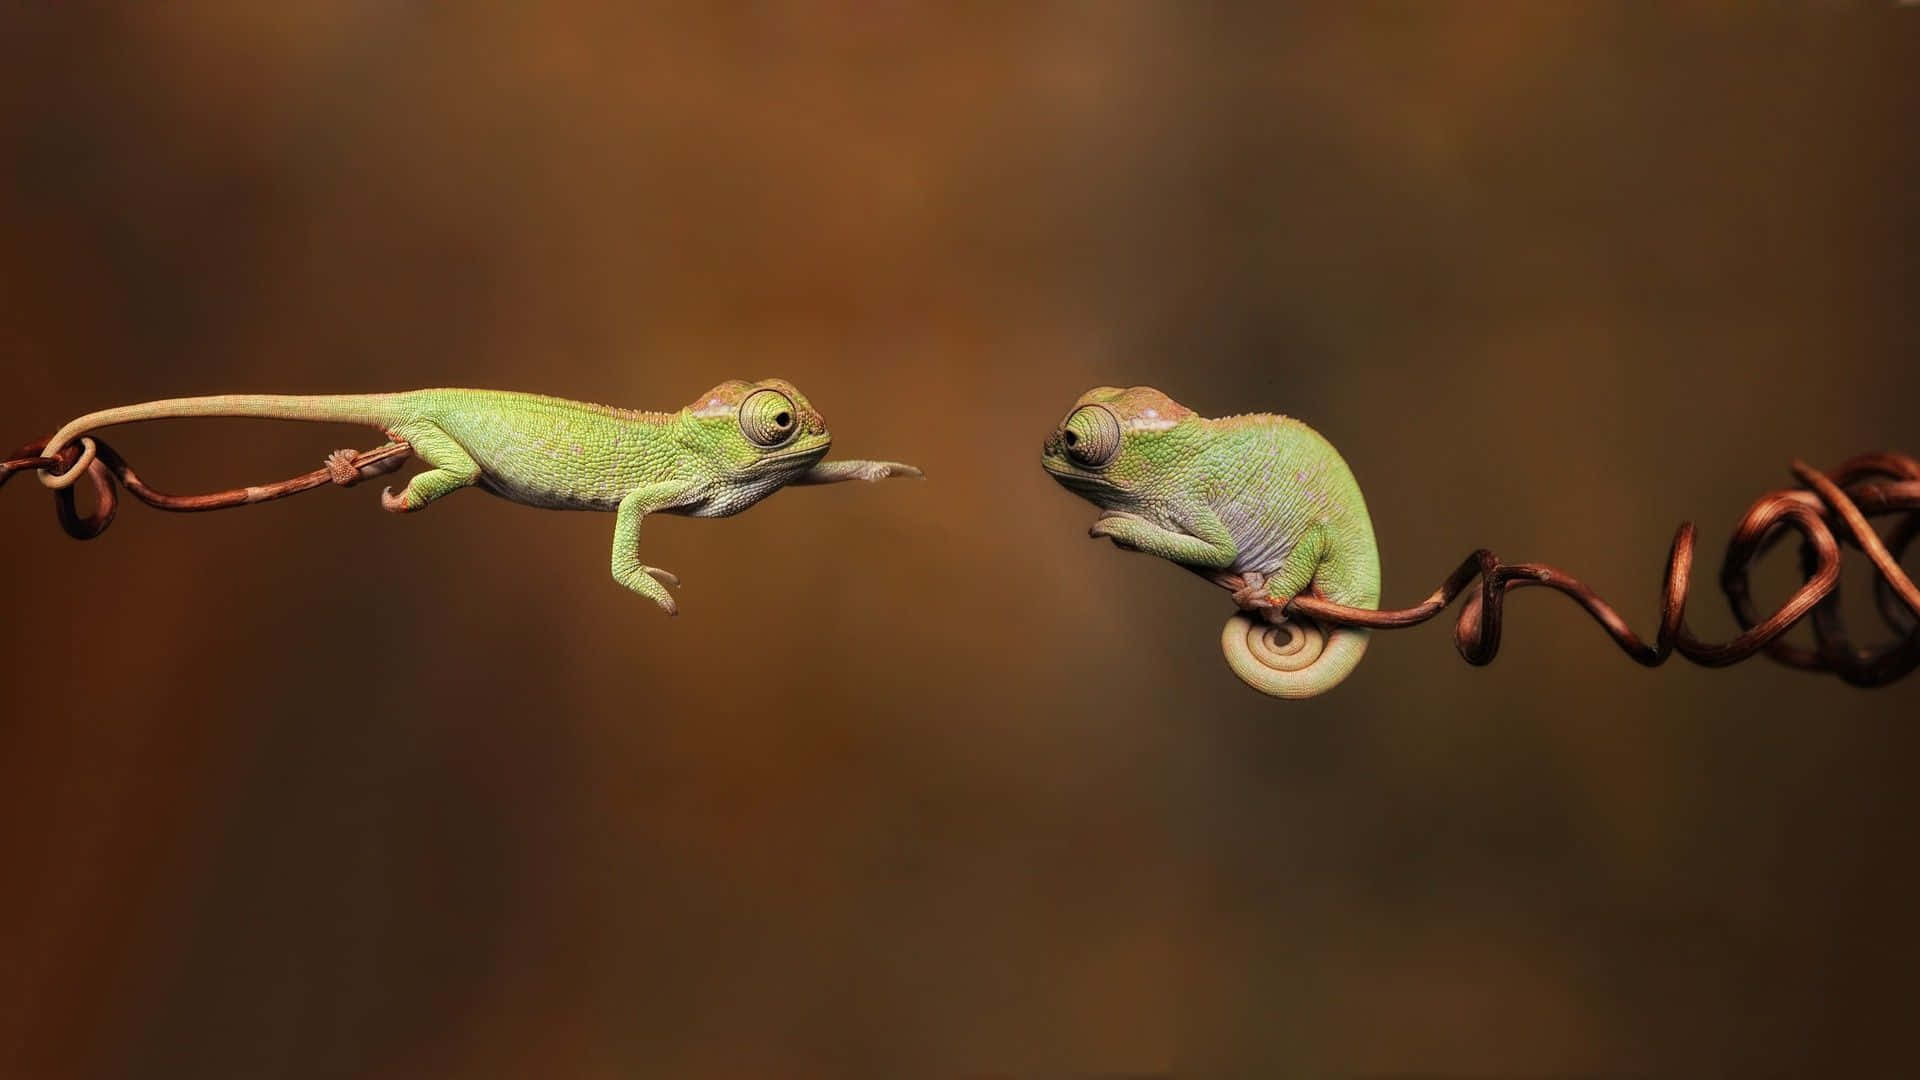 Baby Chameleon Lizard Reaching Picture